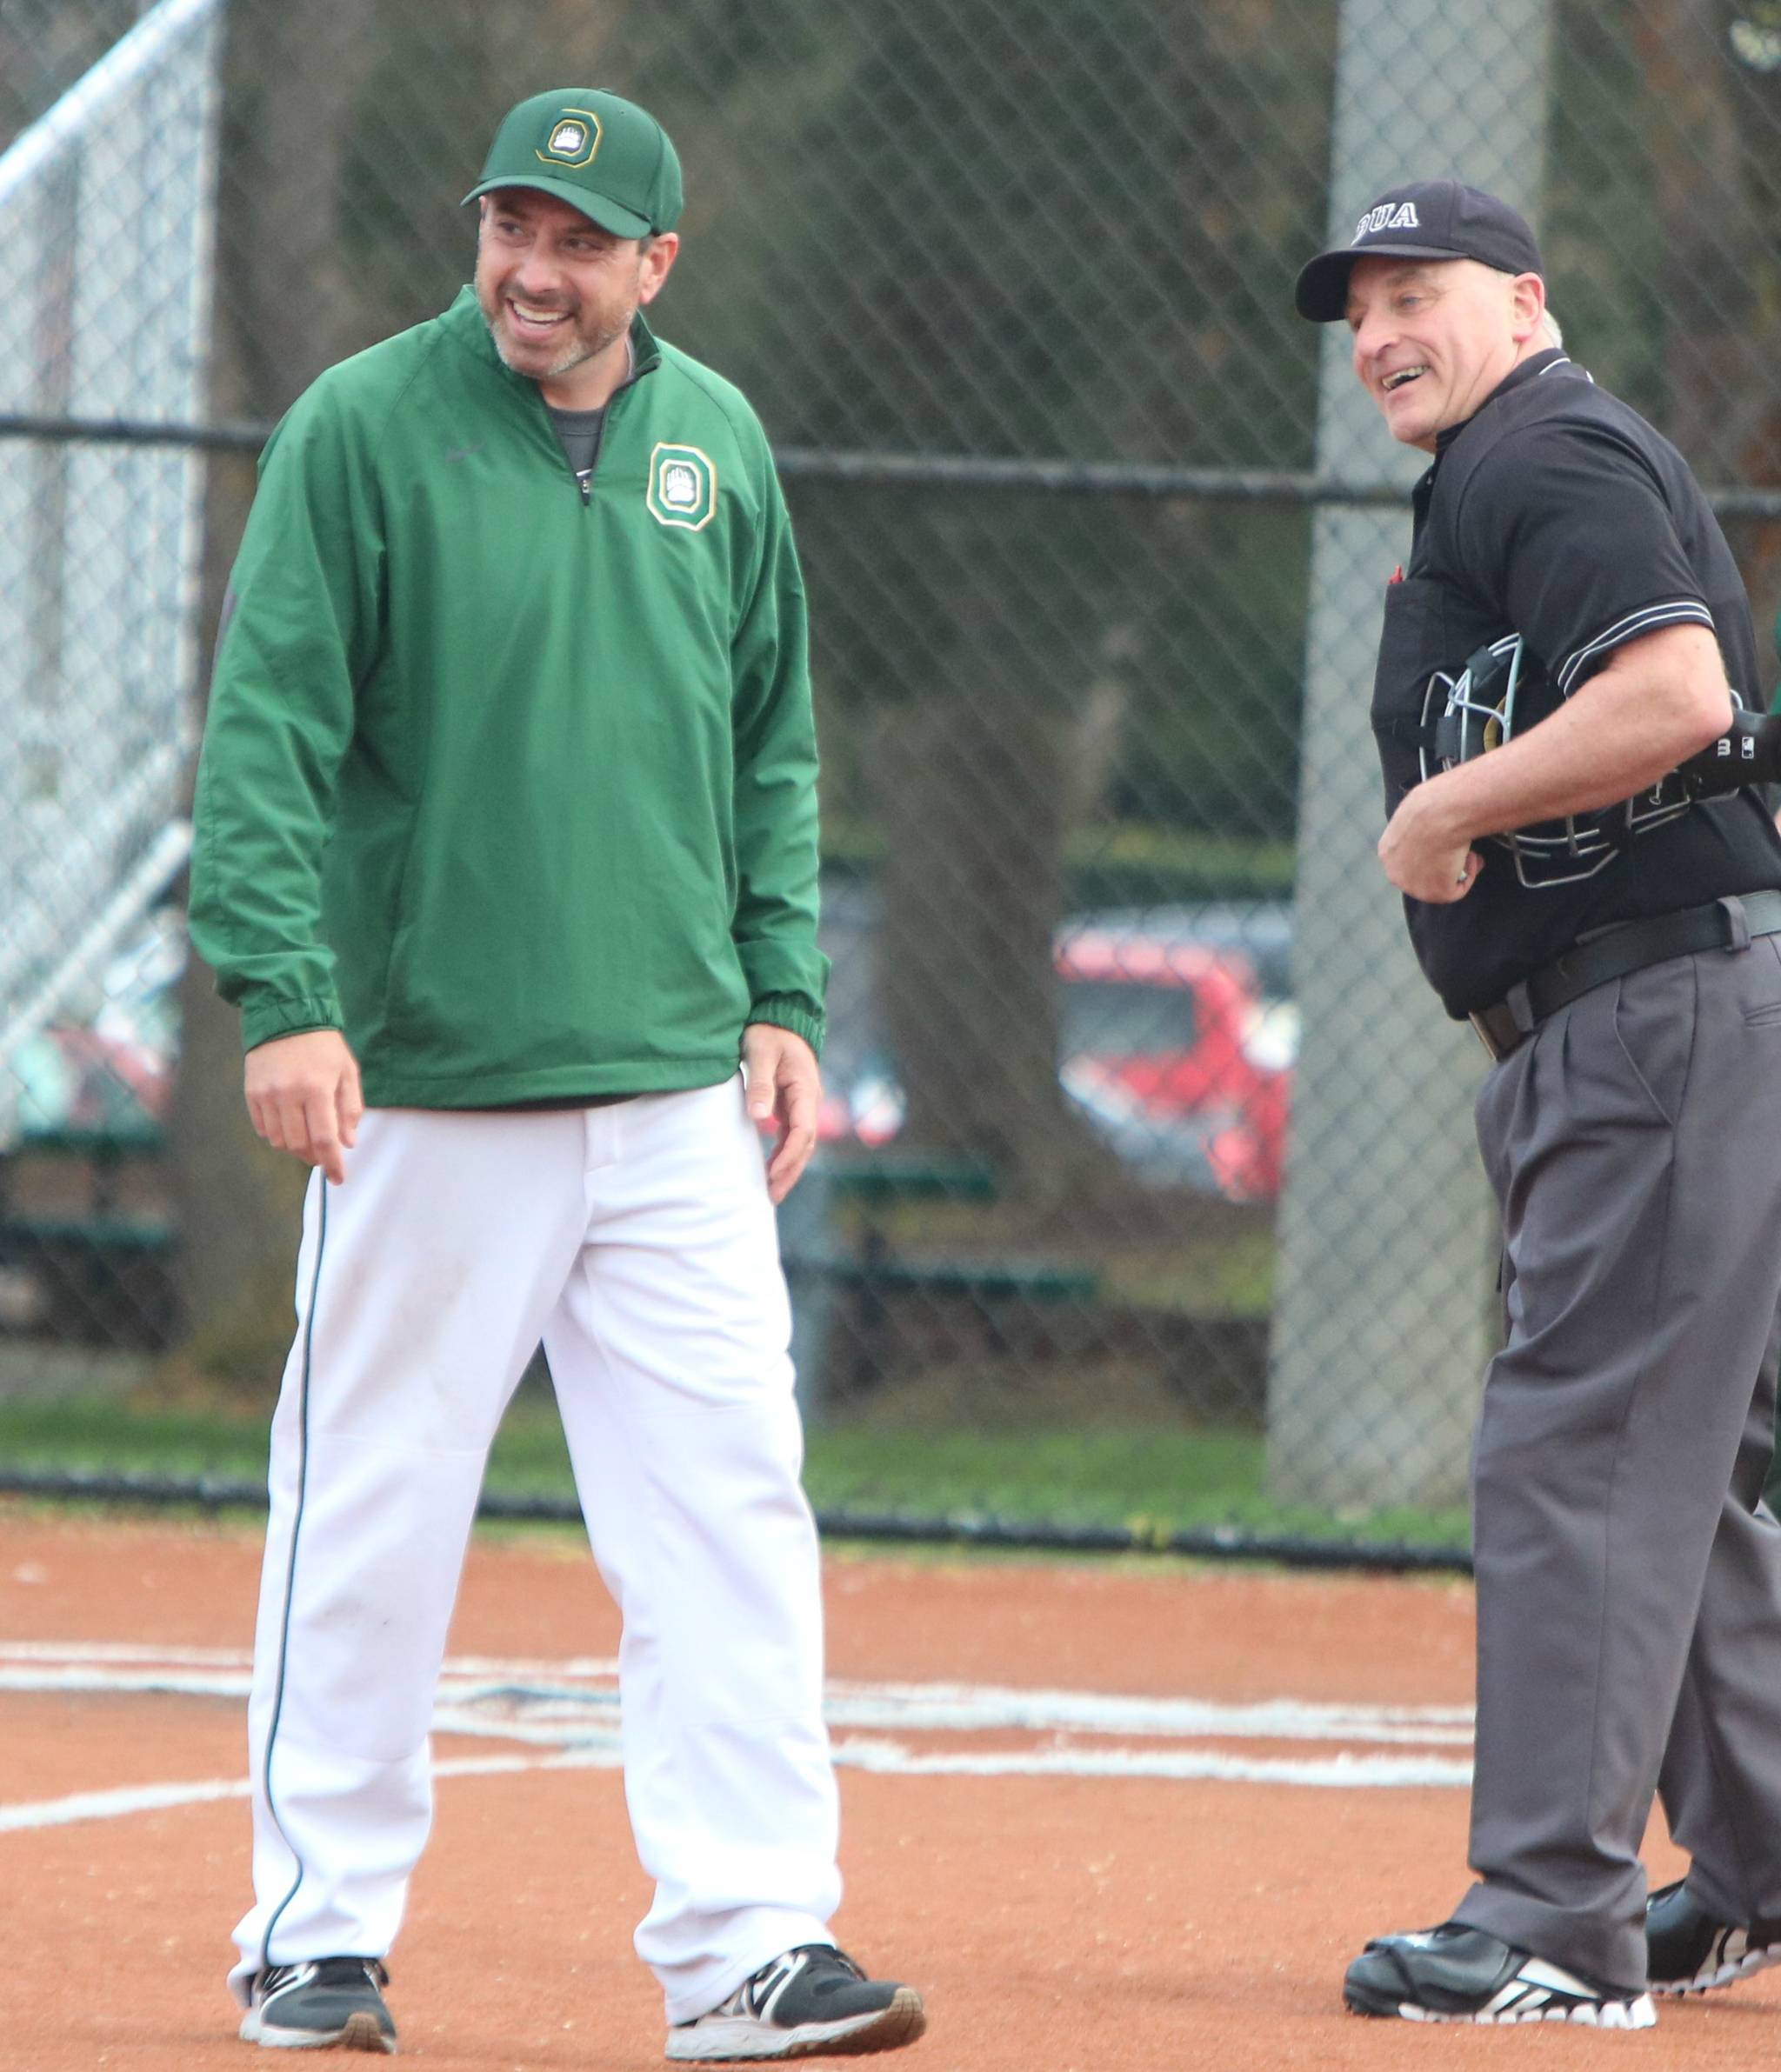 Growls head coach Mike Davidson shares a laugh with the umpire. Andy Nystrom / staff photo